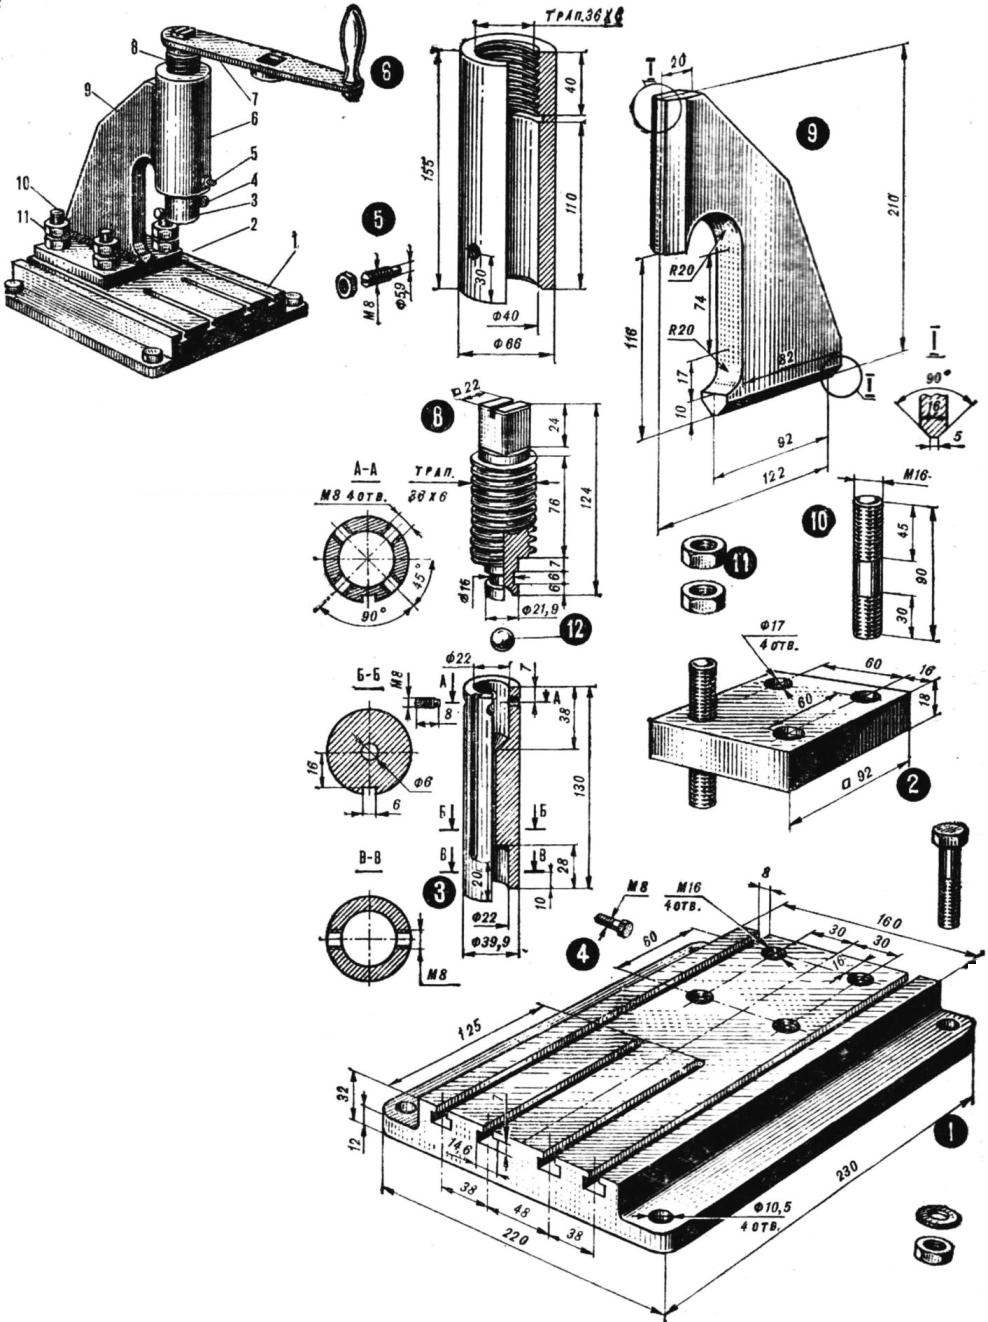 Fig. 1. General view of the press